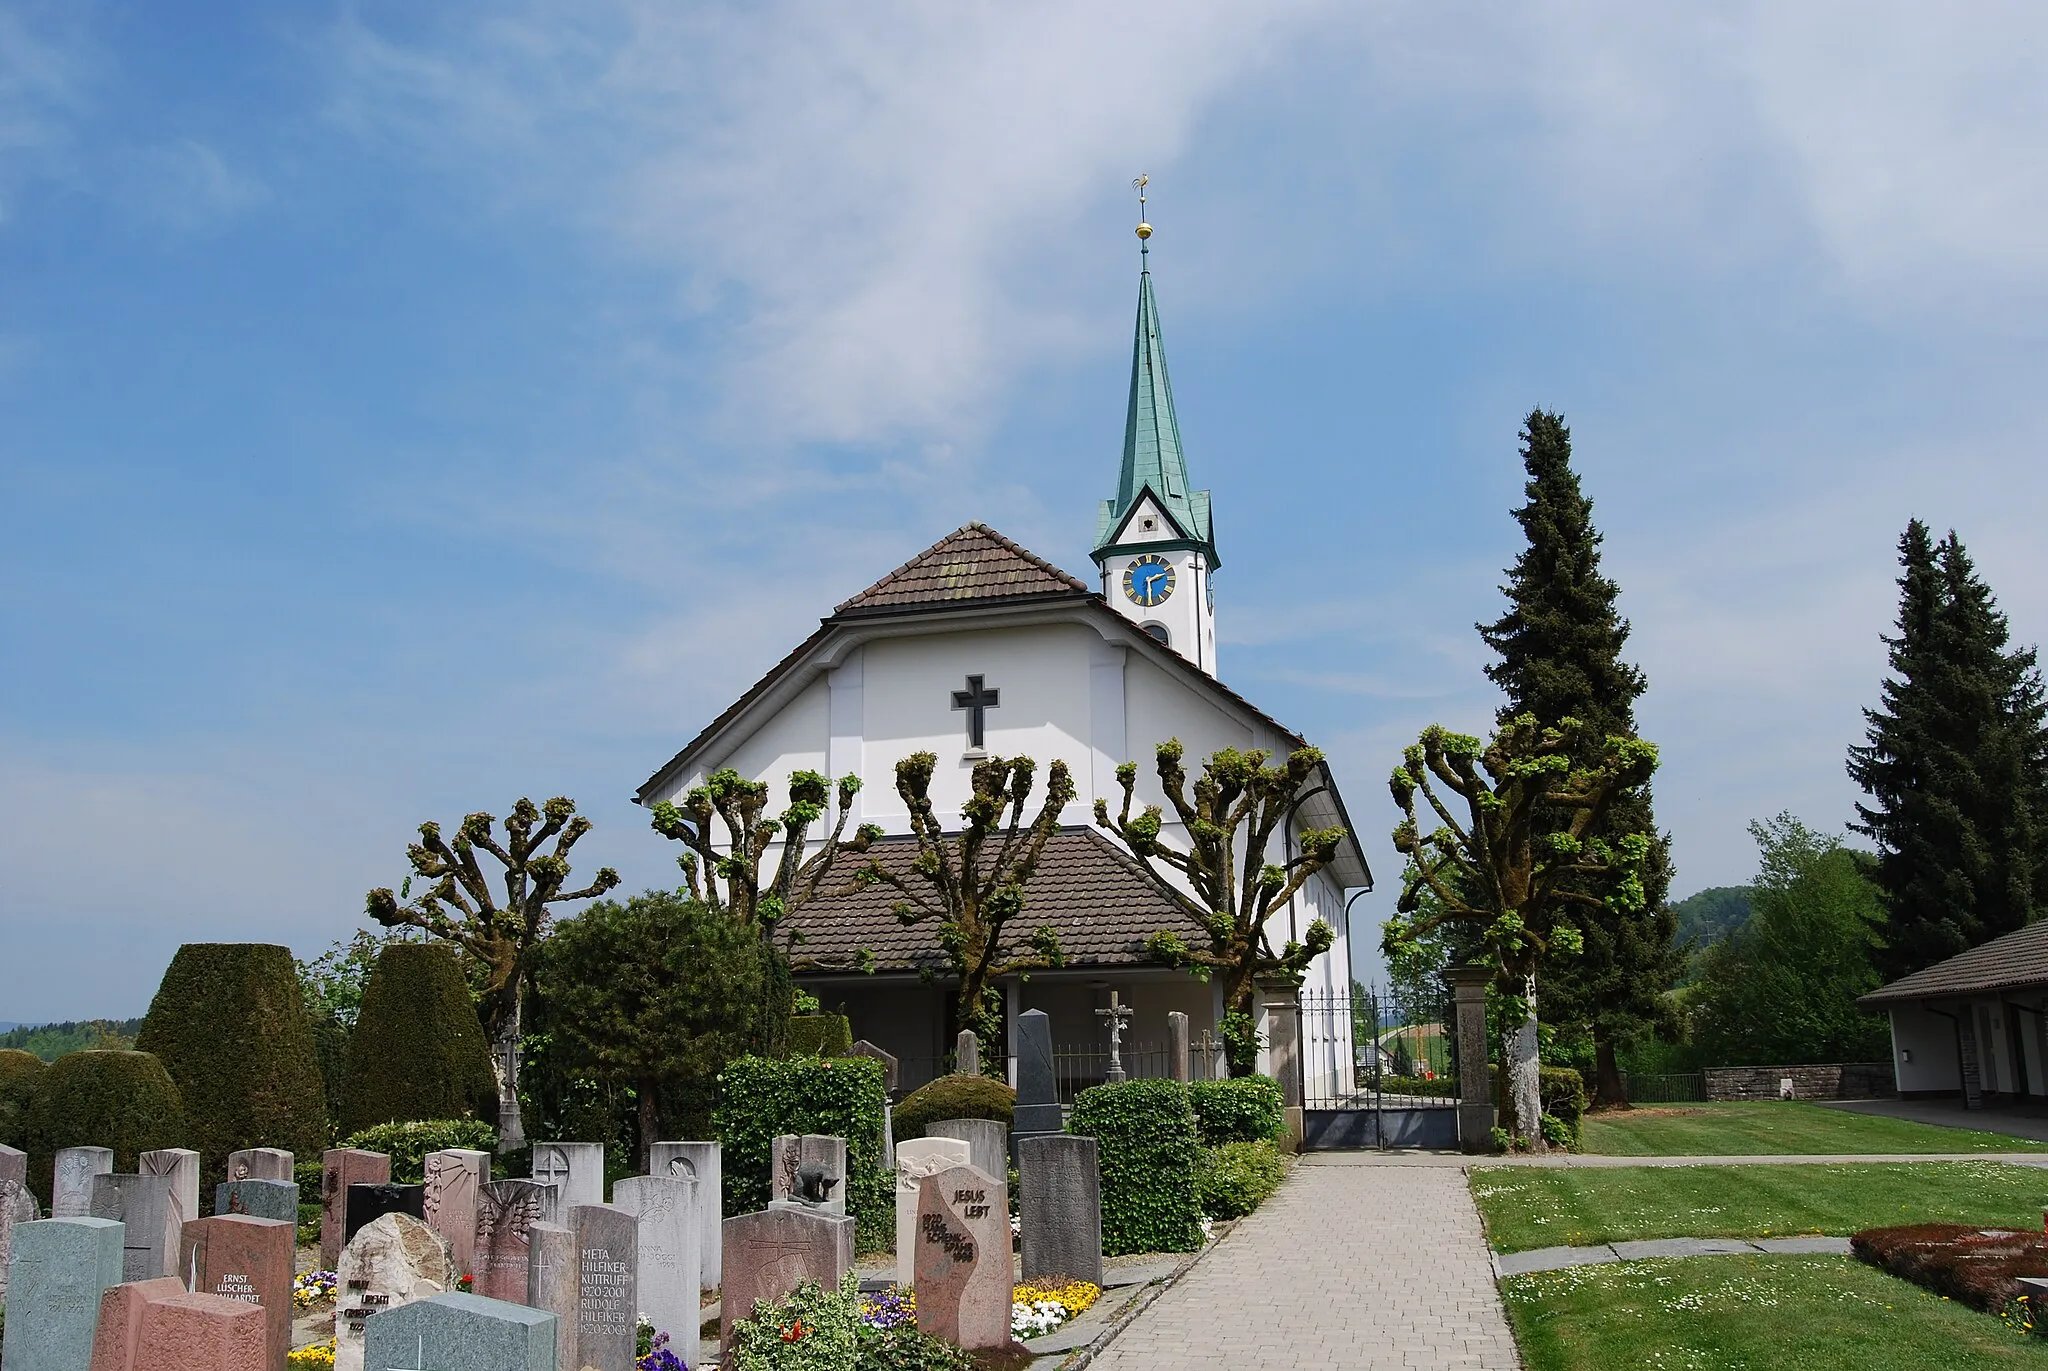 Photo showing: Church of Safenwil, canton of Aargau, Switzerland